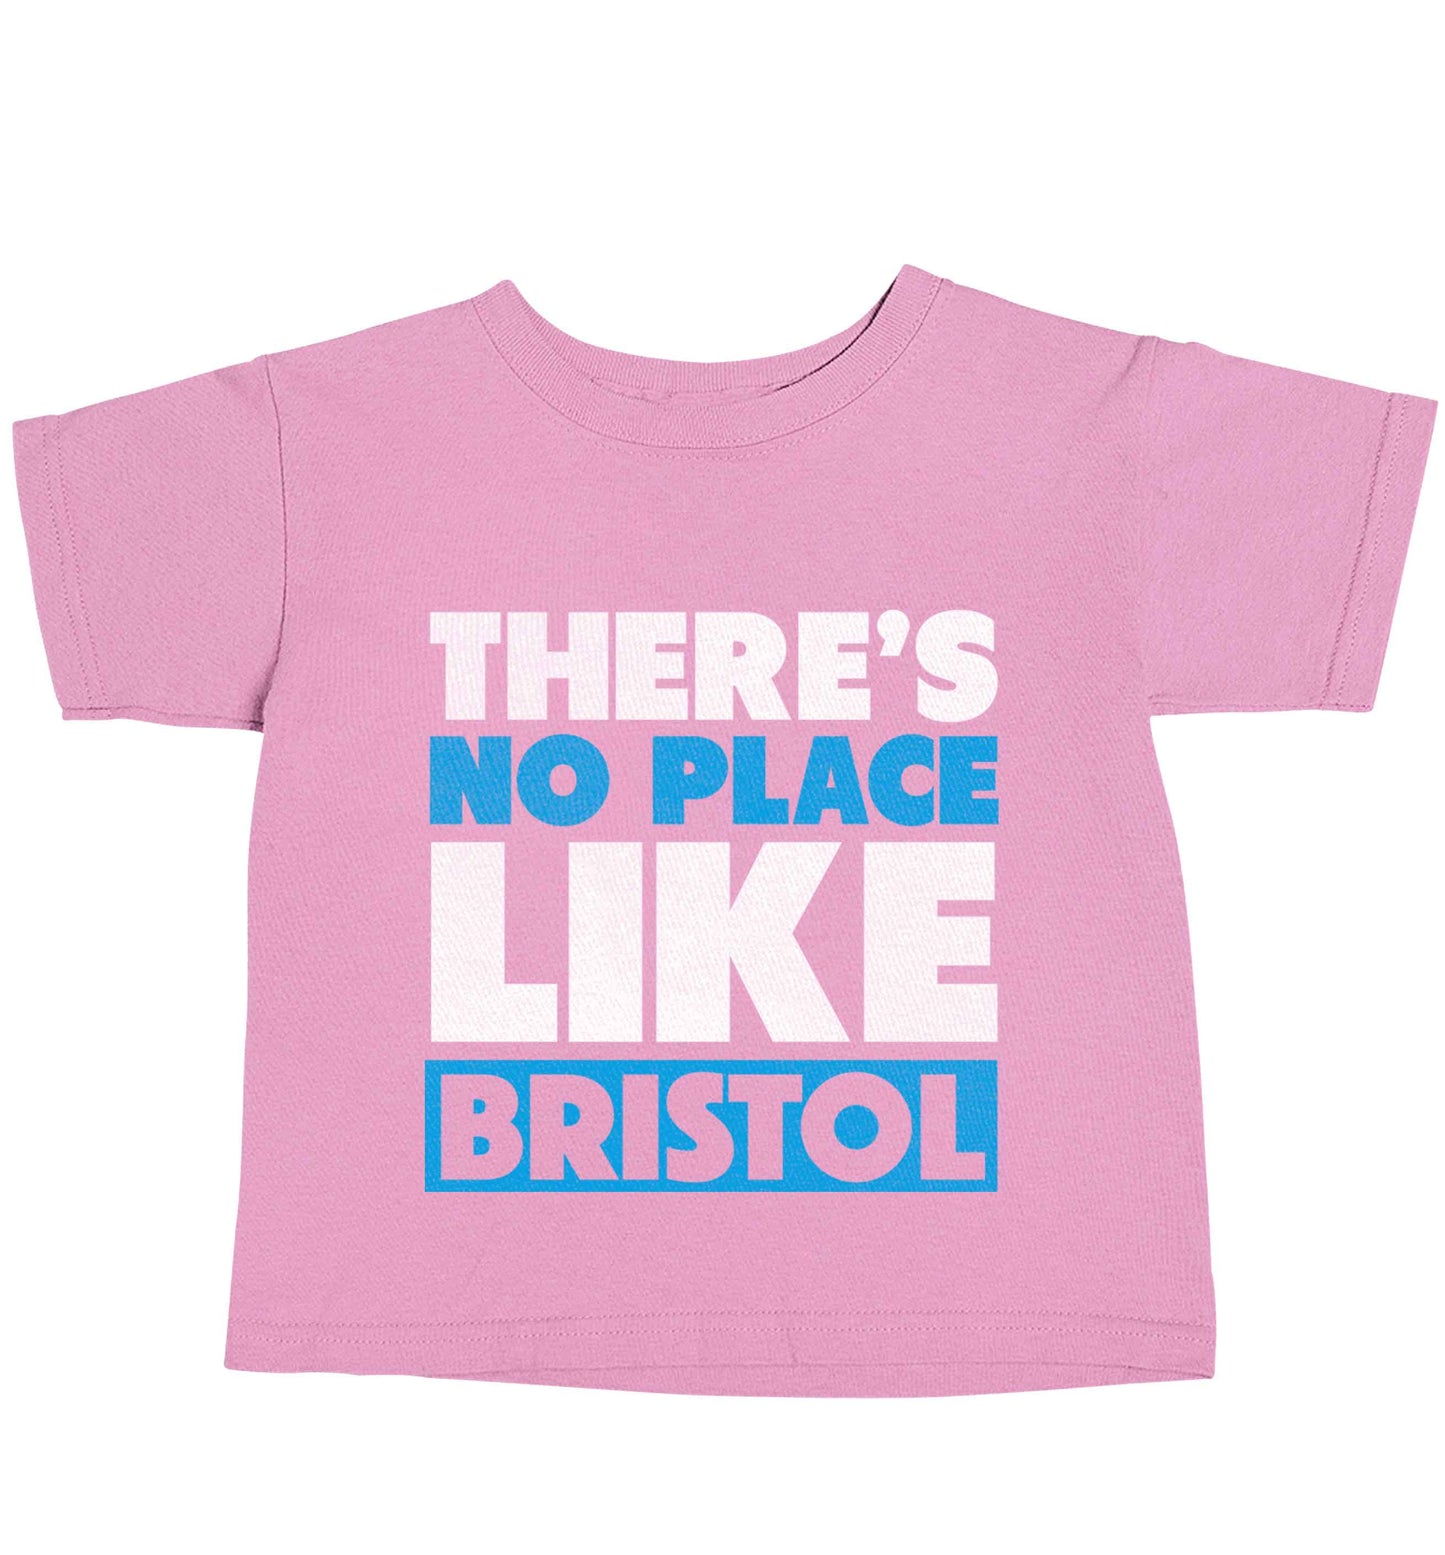 There's no place like Bristol light pink baby toddler Tshirt 2 Years